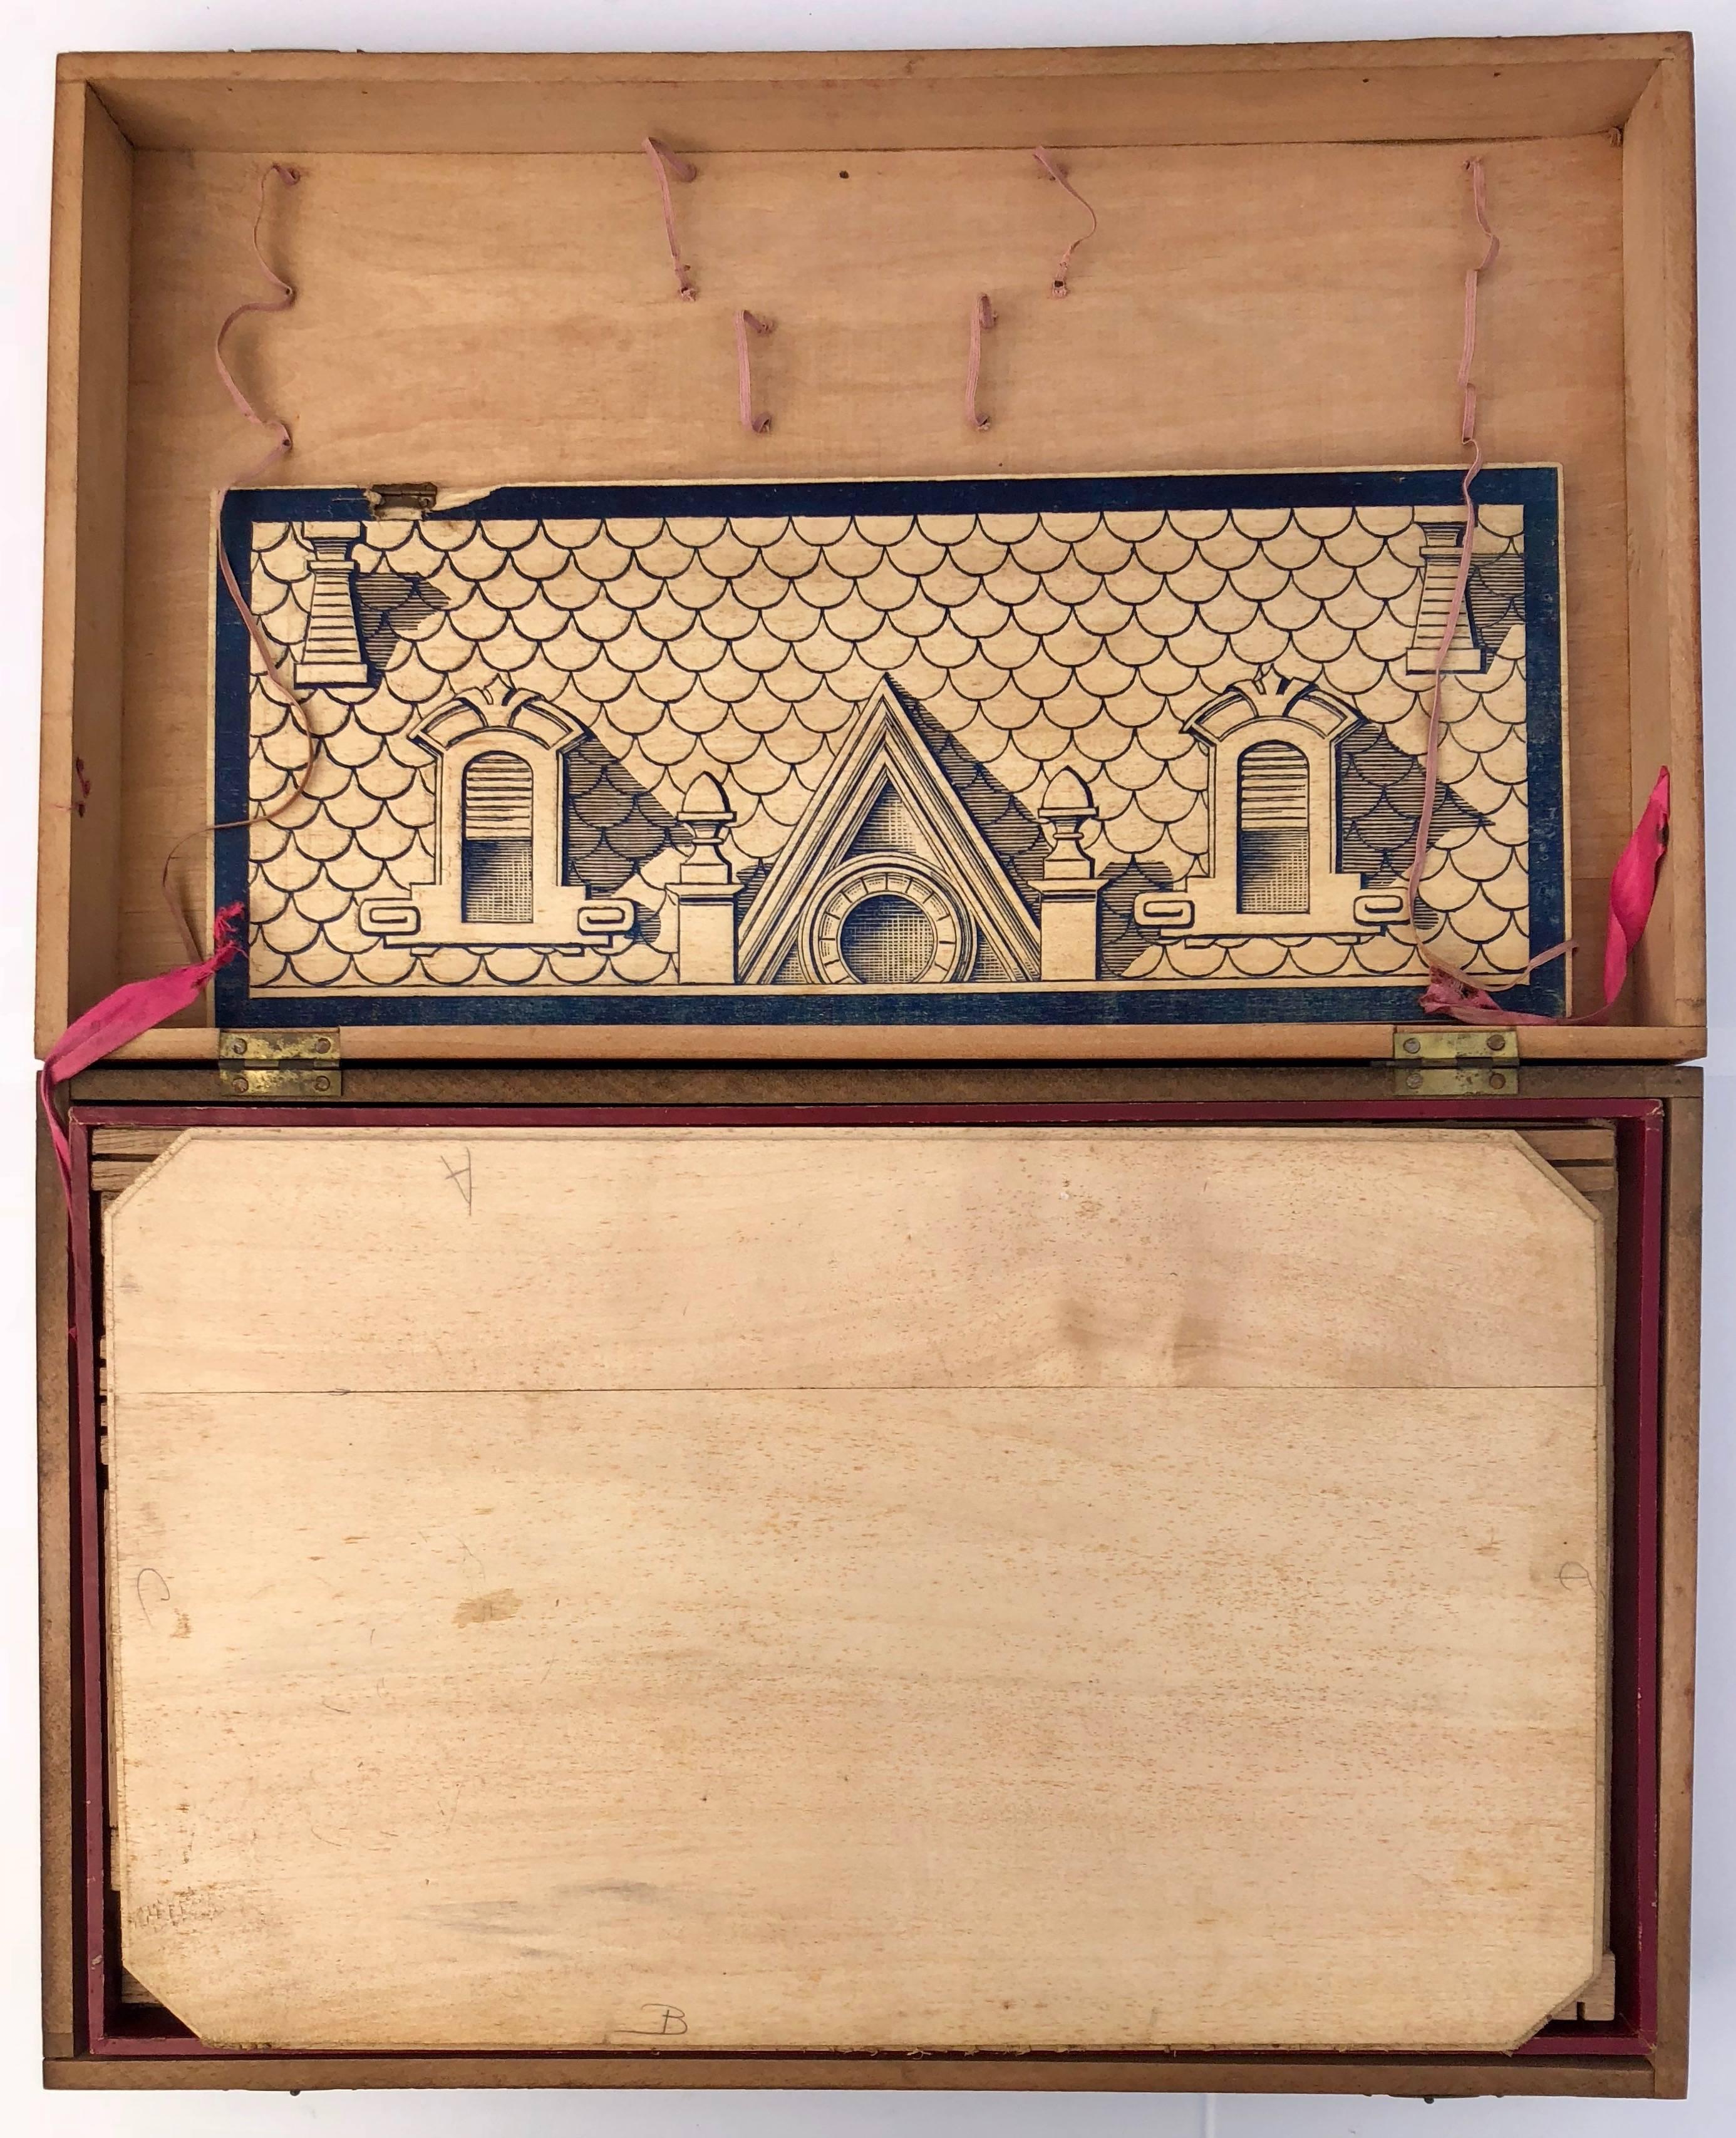 This is a French early 1900s wooden construction game wooden game with 3 drawers, 